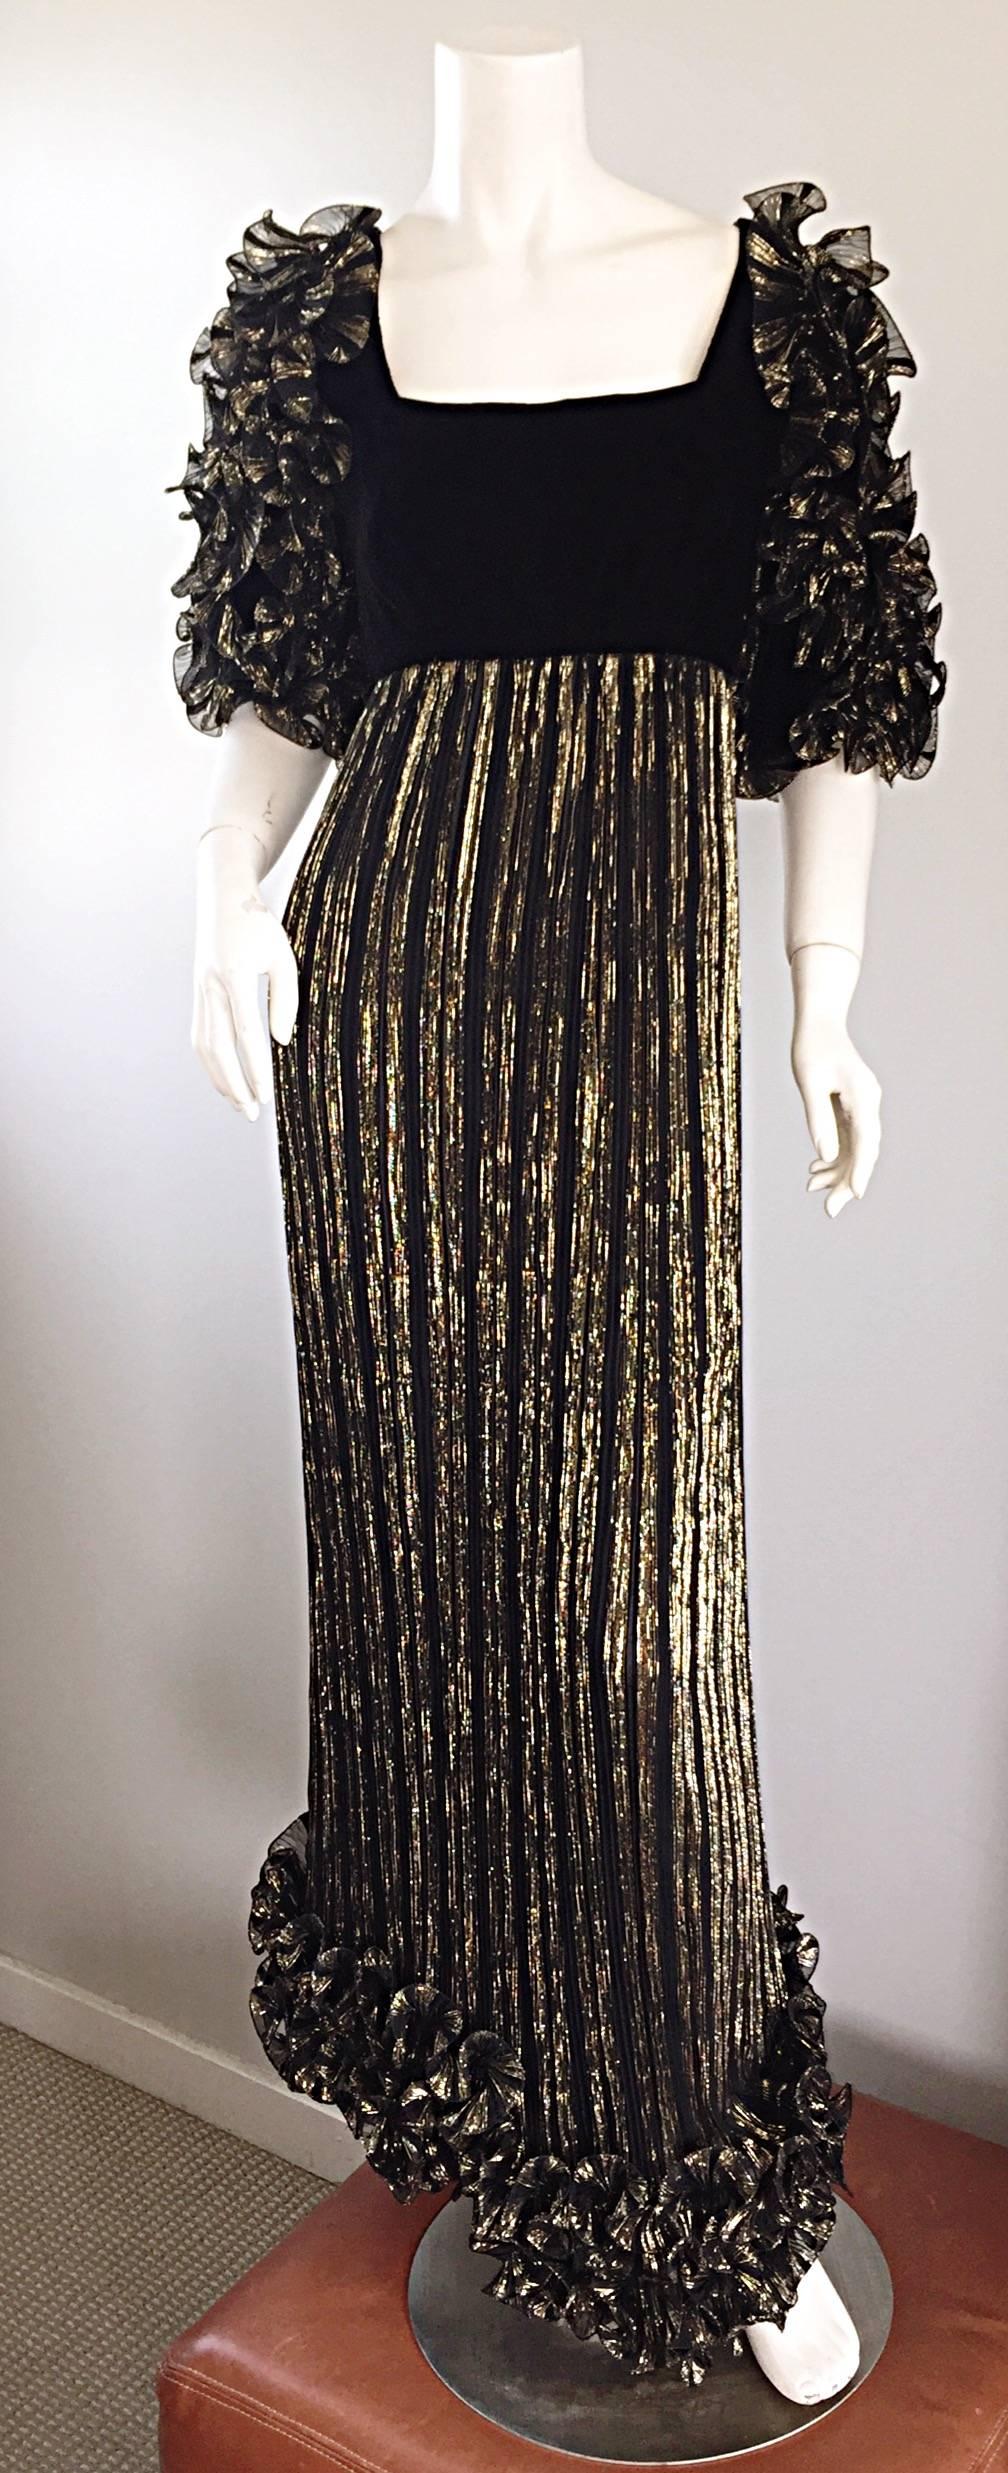 Incredible vintage ALFRED BOSAND couture black and gold gown! Features a silk accordion pleated gold skirt with attached black silk velvet bodice. Amazing ruffled sleeves with same gold accordion pleating as skirt. Couture quality with hand-sewn